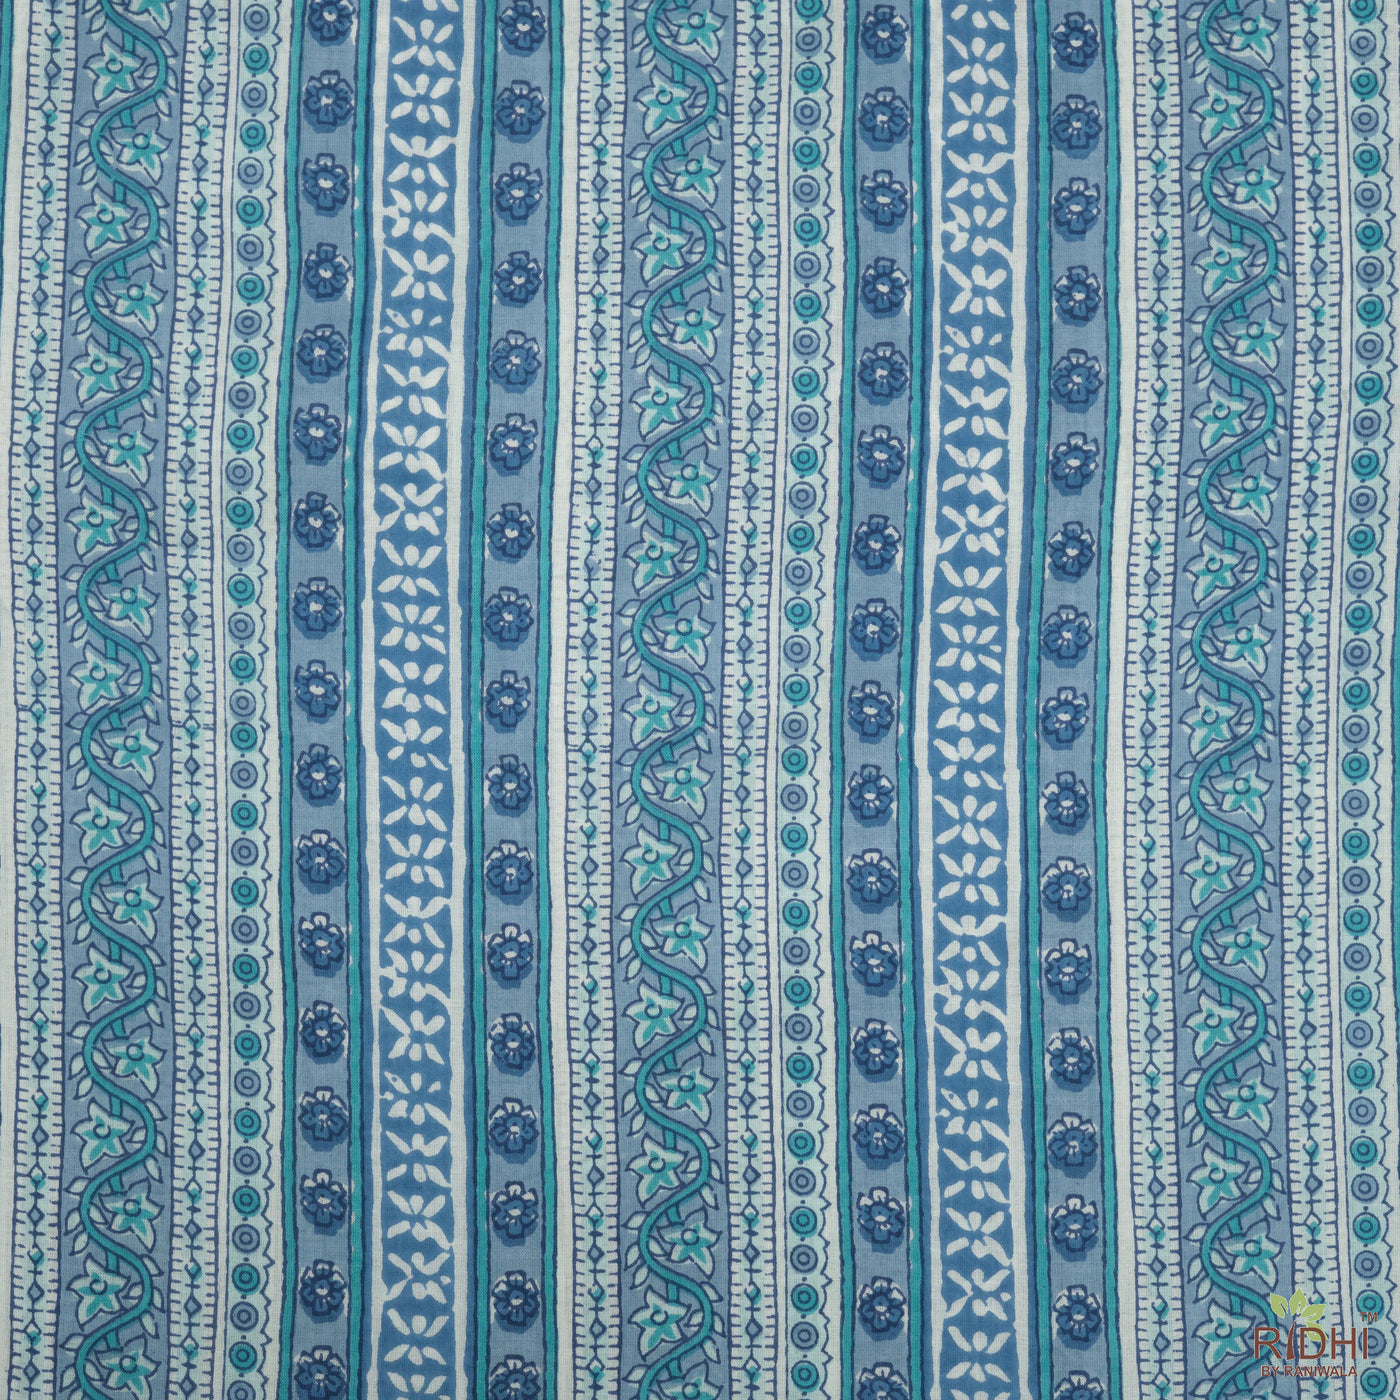 Stone and Teal Blue Indian Floral Printed 100% Pure Cotton Cloth, Fabric by the yard, Women's clothing Curtains Pillows Napkins Dresses Bags